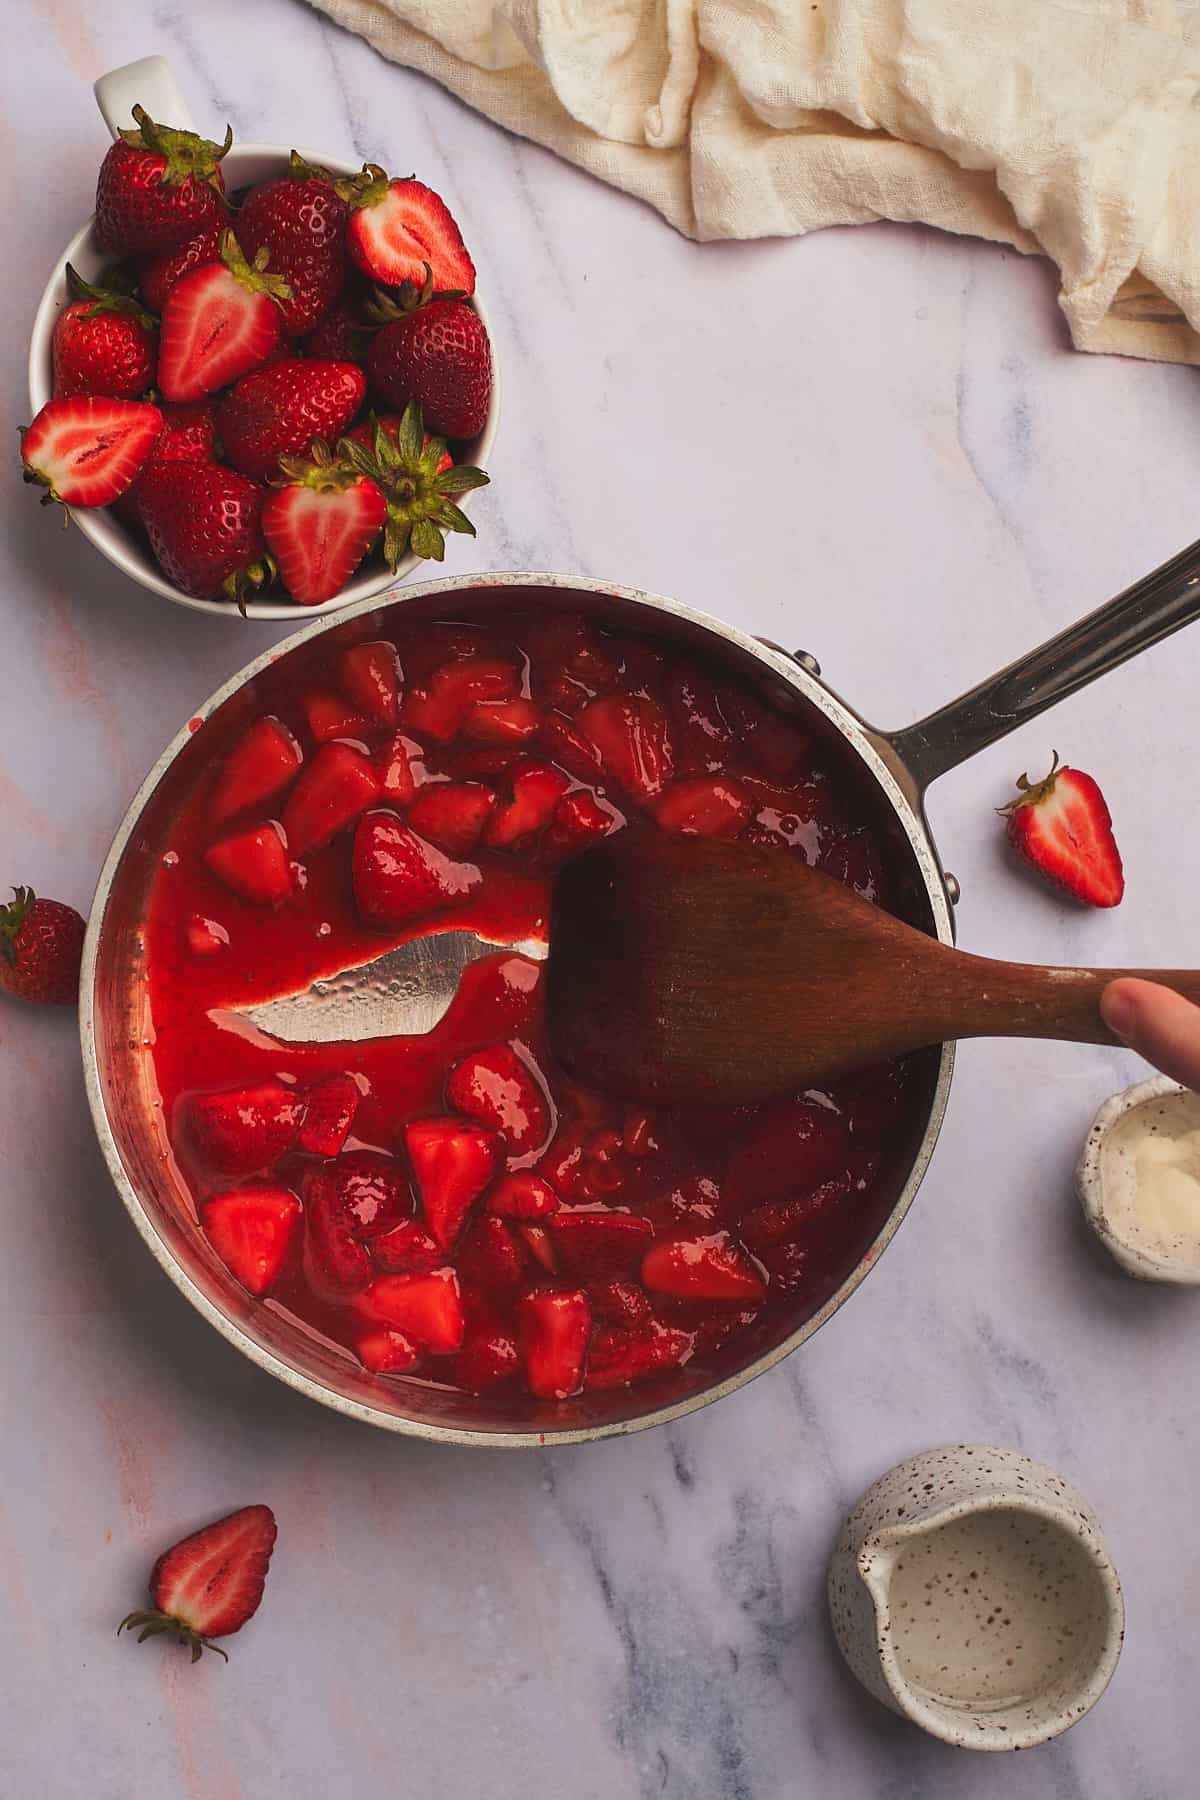 dragging a wooden spoon along the bottom of a saucepan with strawberry sauce to see that the sauce has thickened.